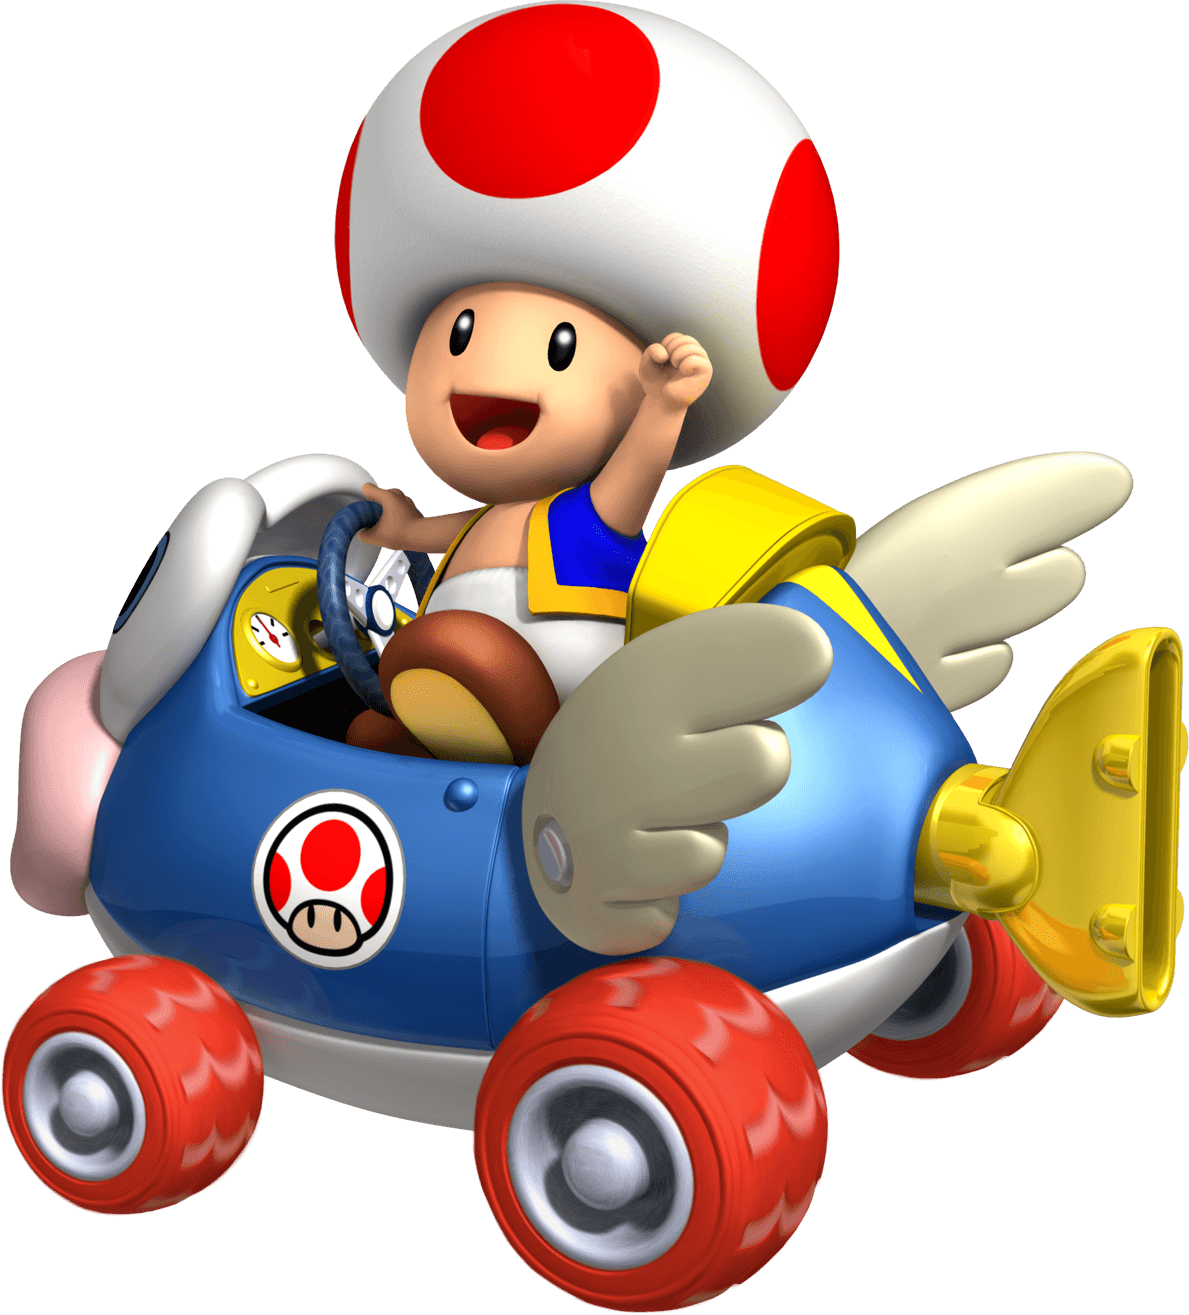 Top 98+ Wallpaper Pictures Of Mario Kart Characters Latest